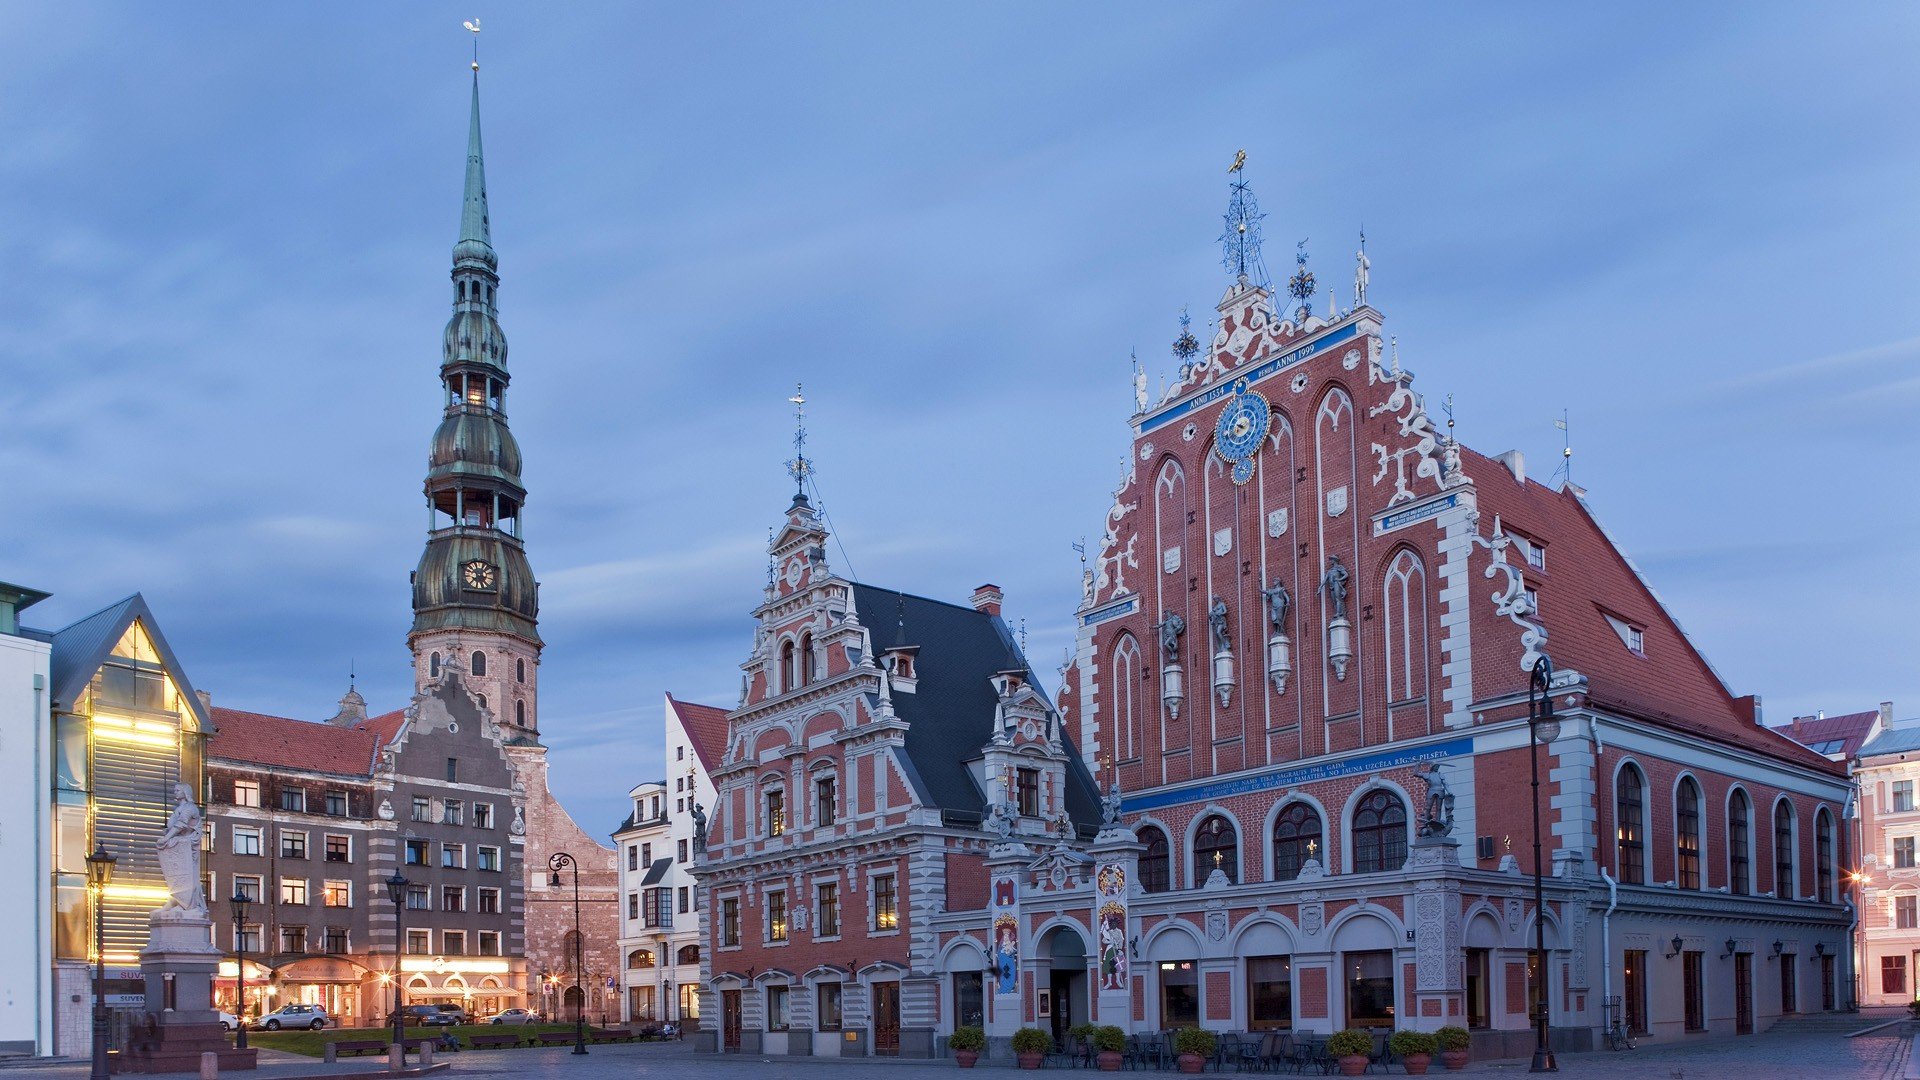 cityscapes, Architecture, Latvia, Oldtown Wallpaper